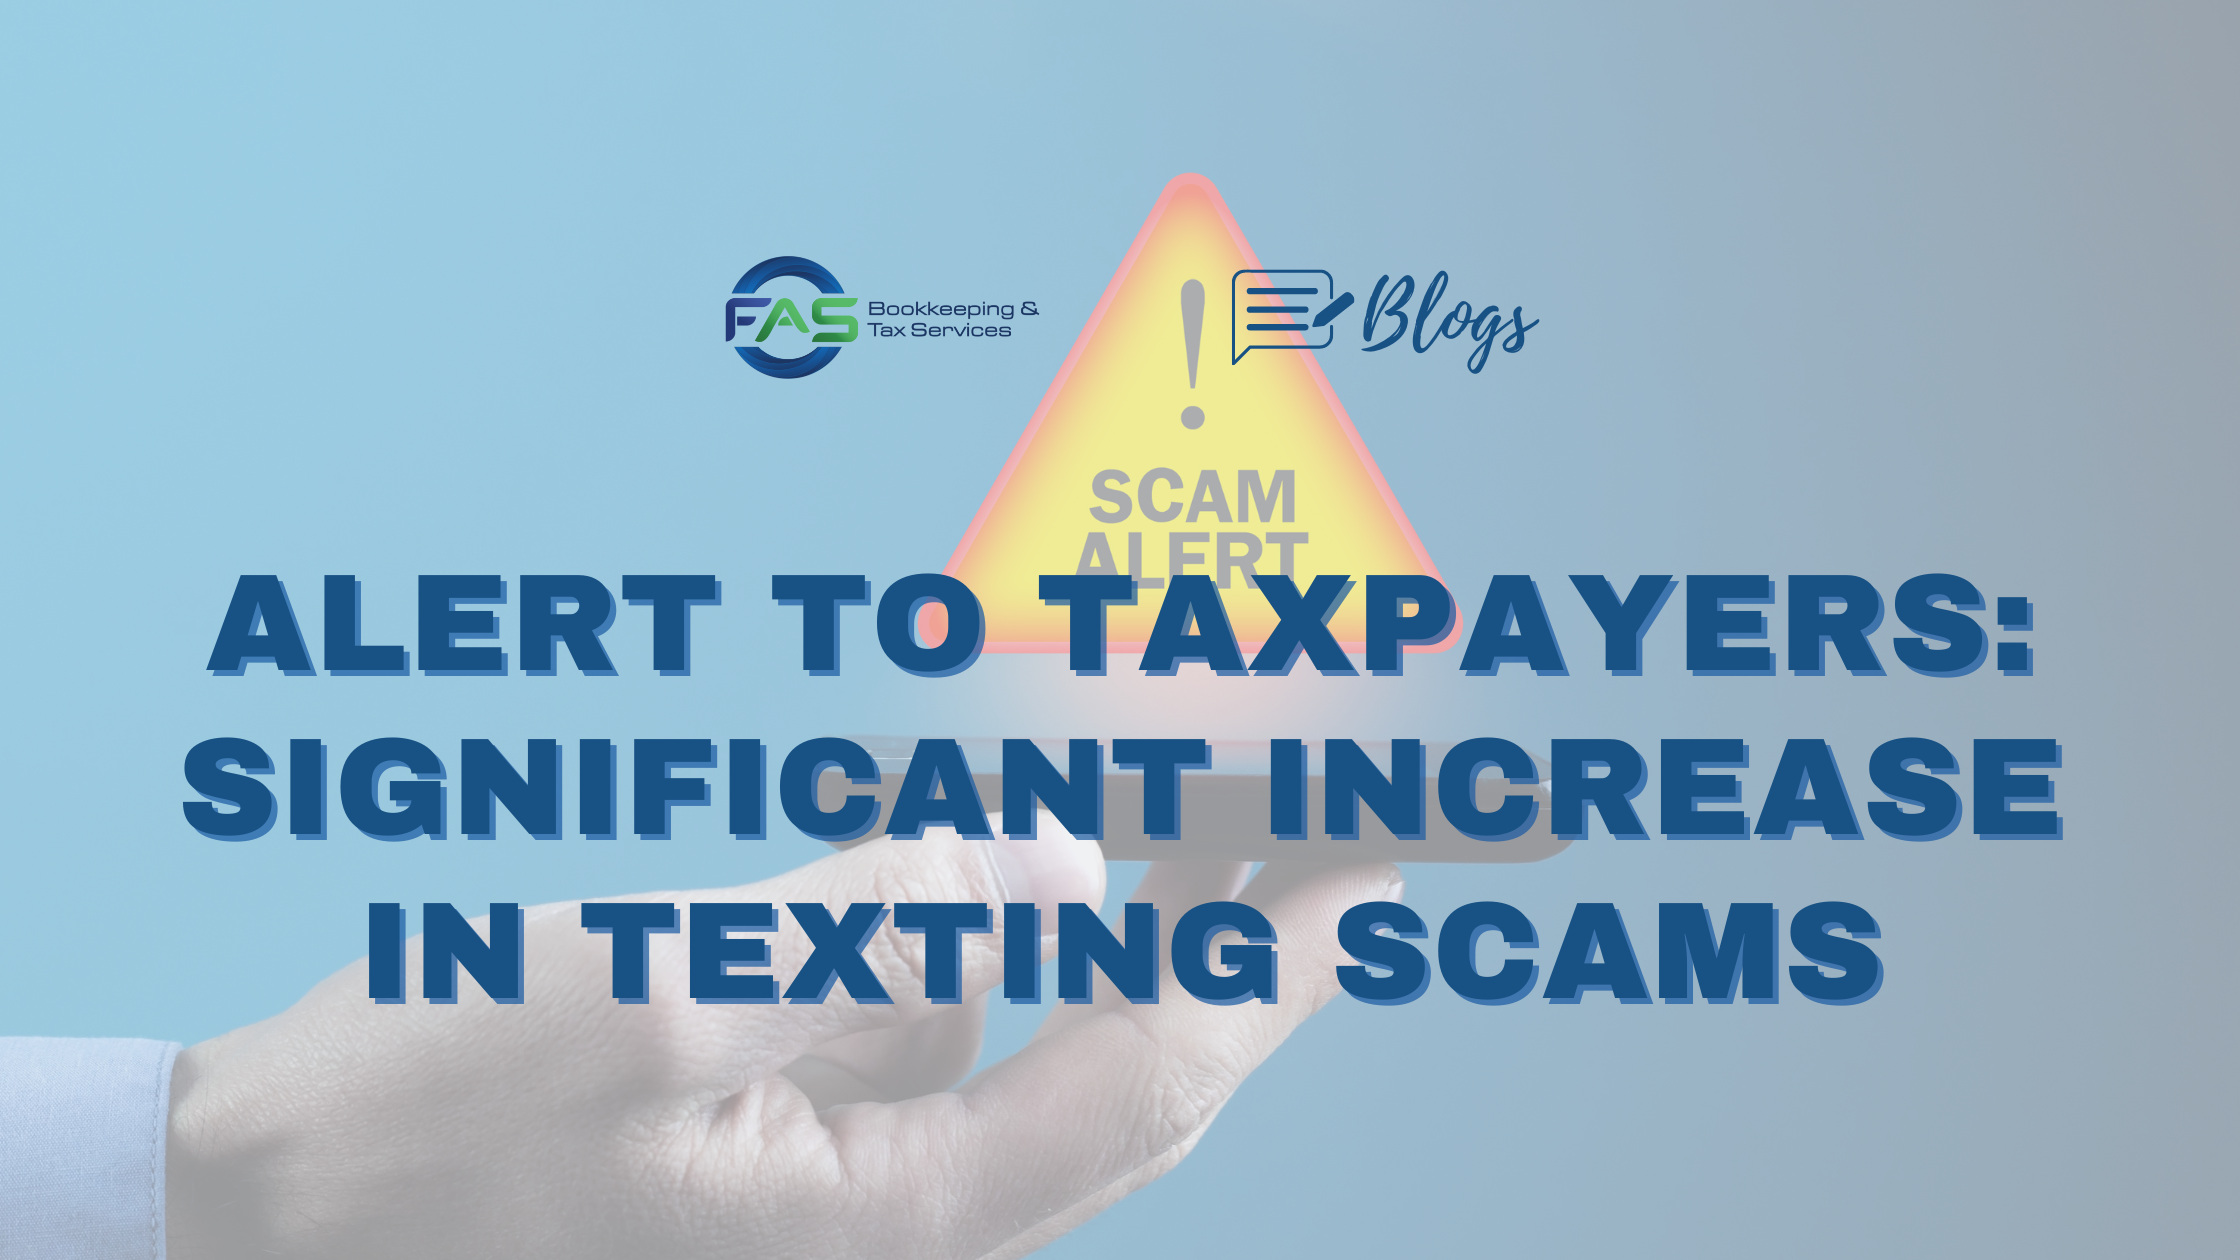 Alert to Taxpayers: Significant Increase in Texting Scams